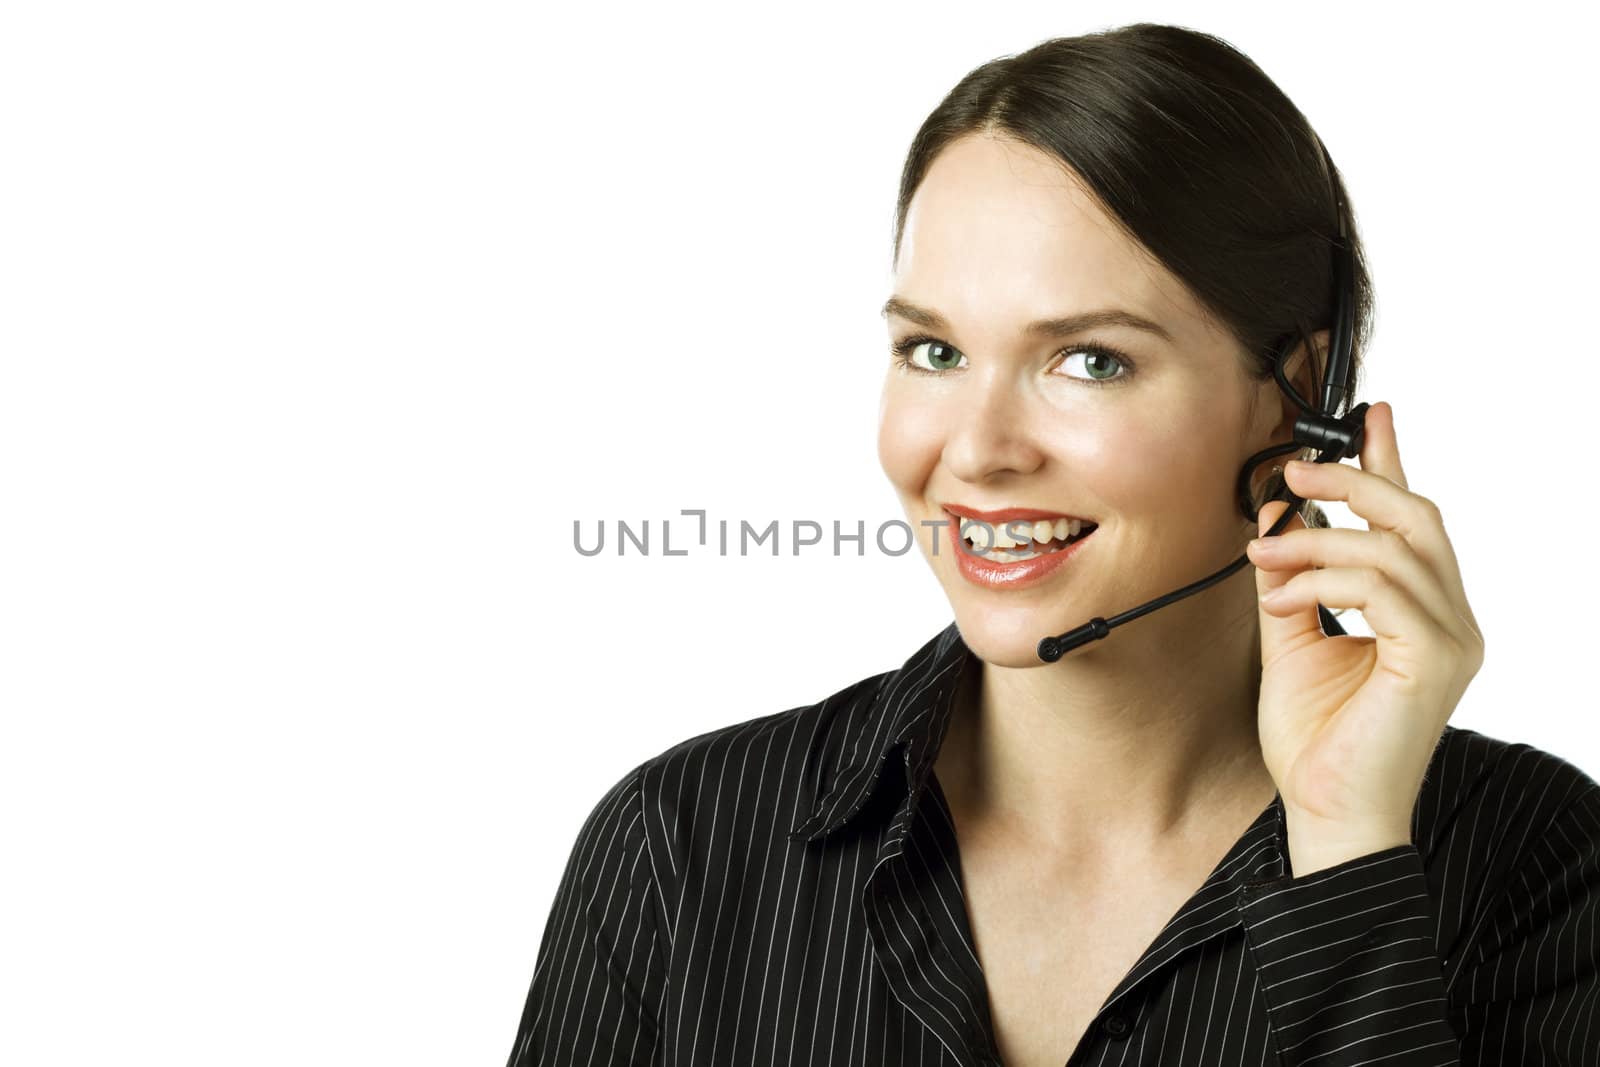 Friendly smiling telephone operator/secretary with headset over white